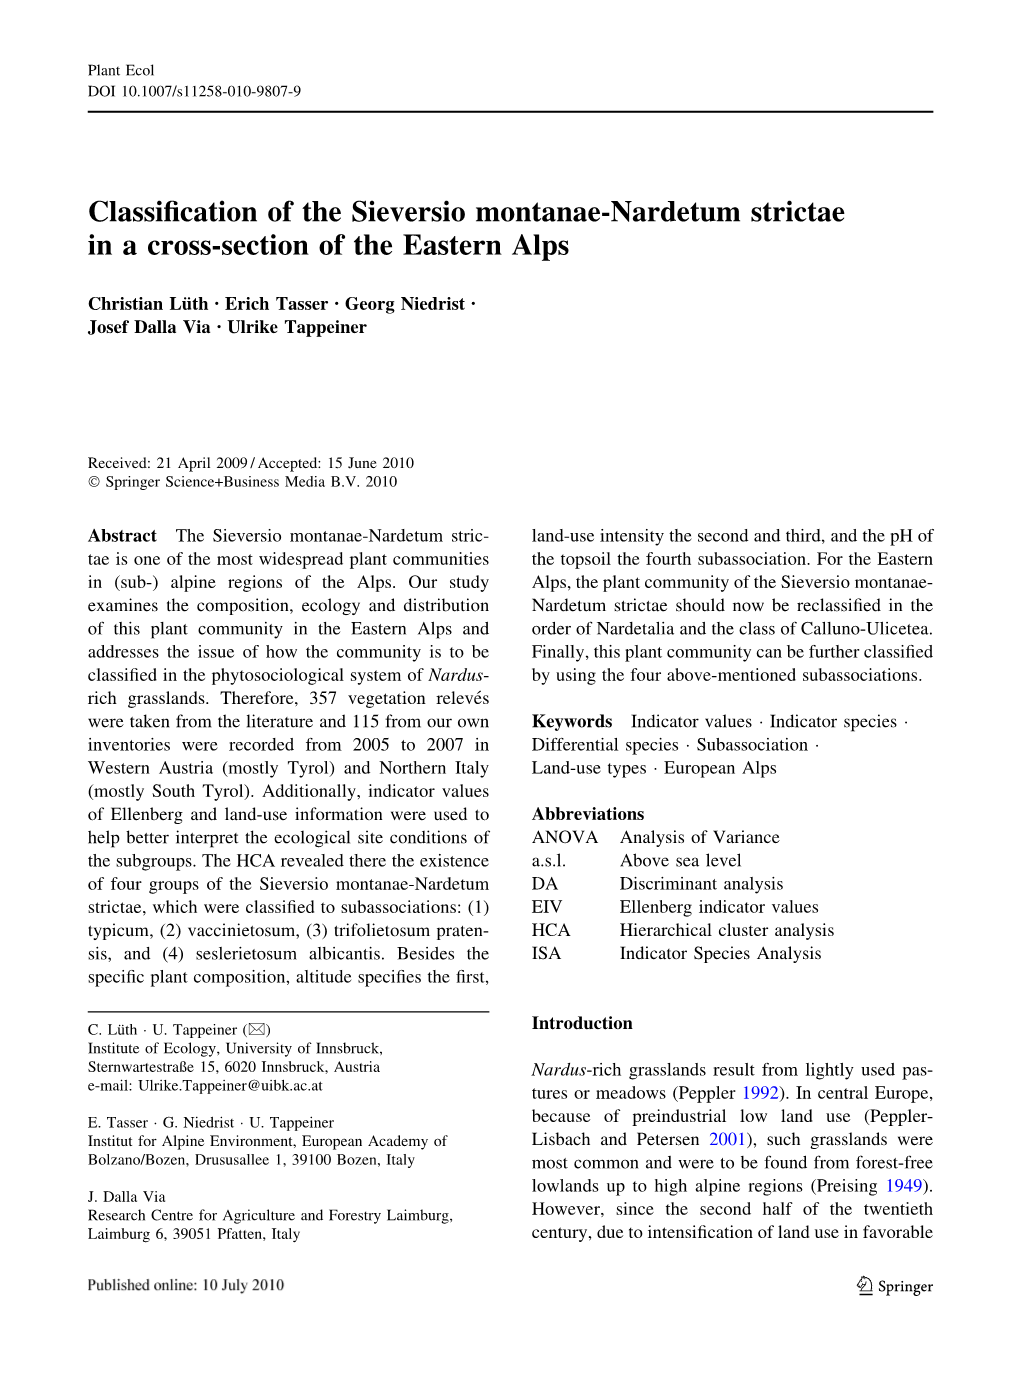 Classification of the Sieversio Montanae-Nardetum Strictae in A